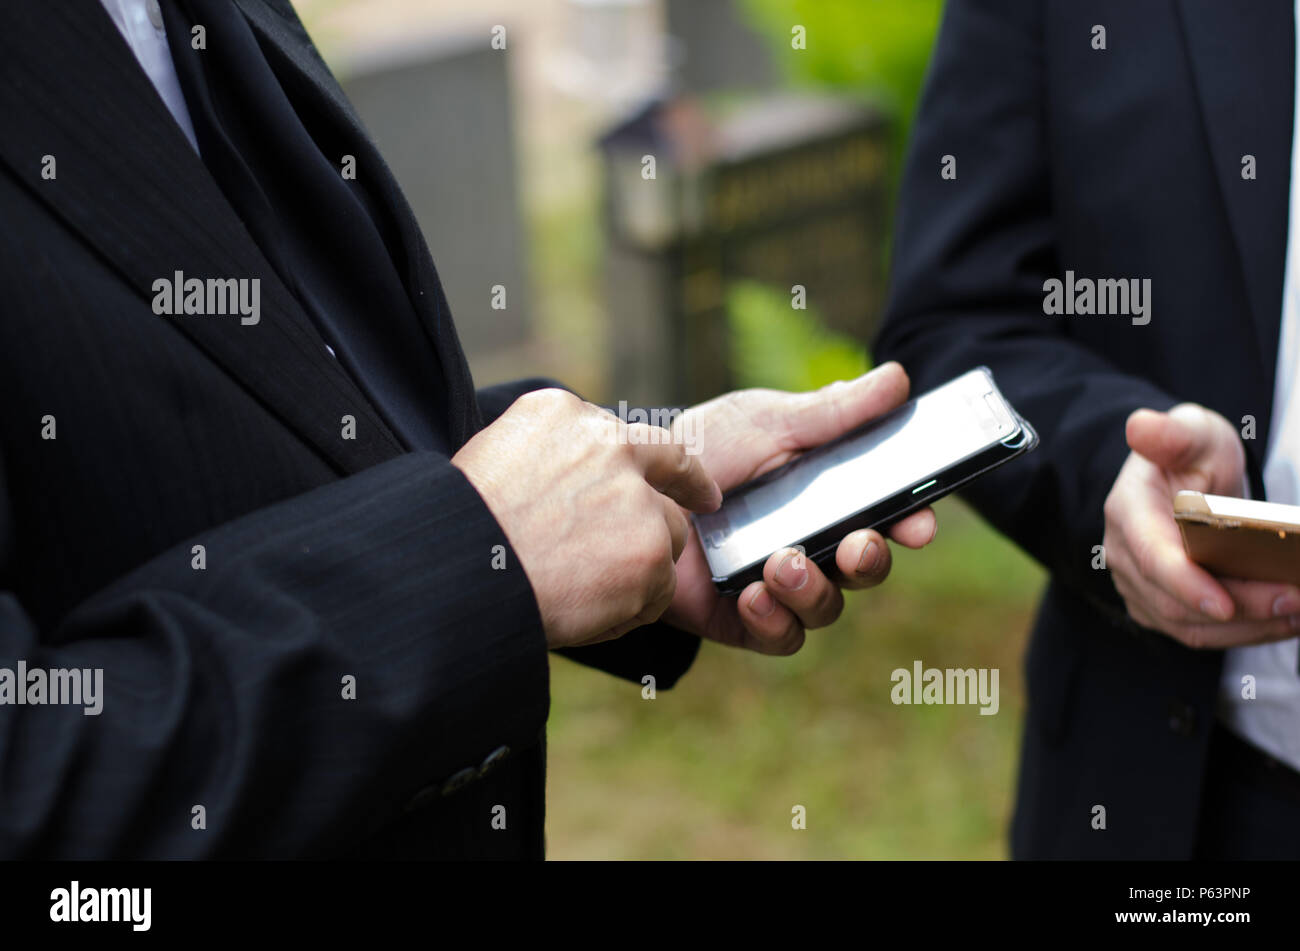 Elderly man in dark suit using a mobile phone Stock Photo